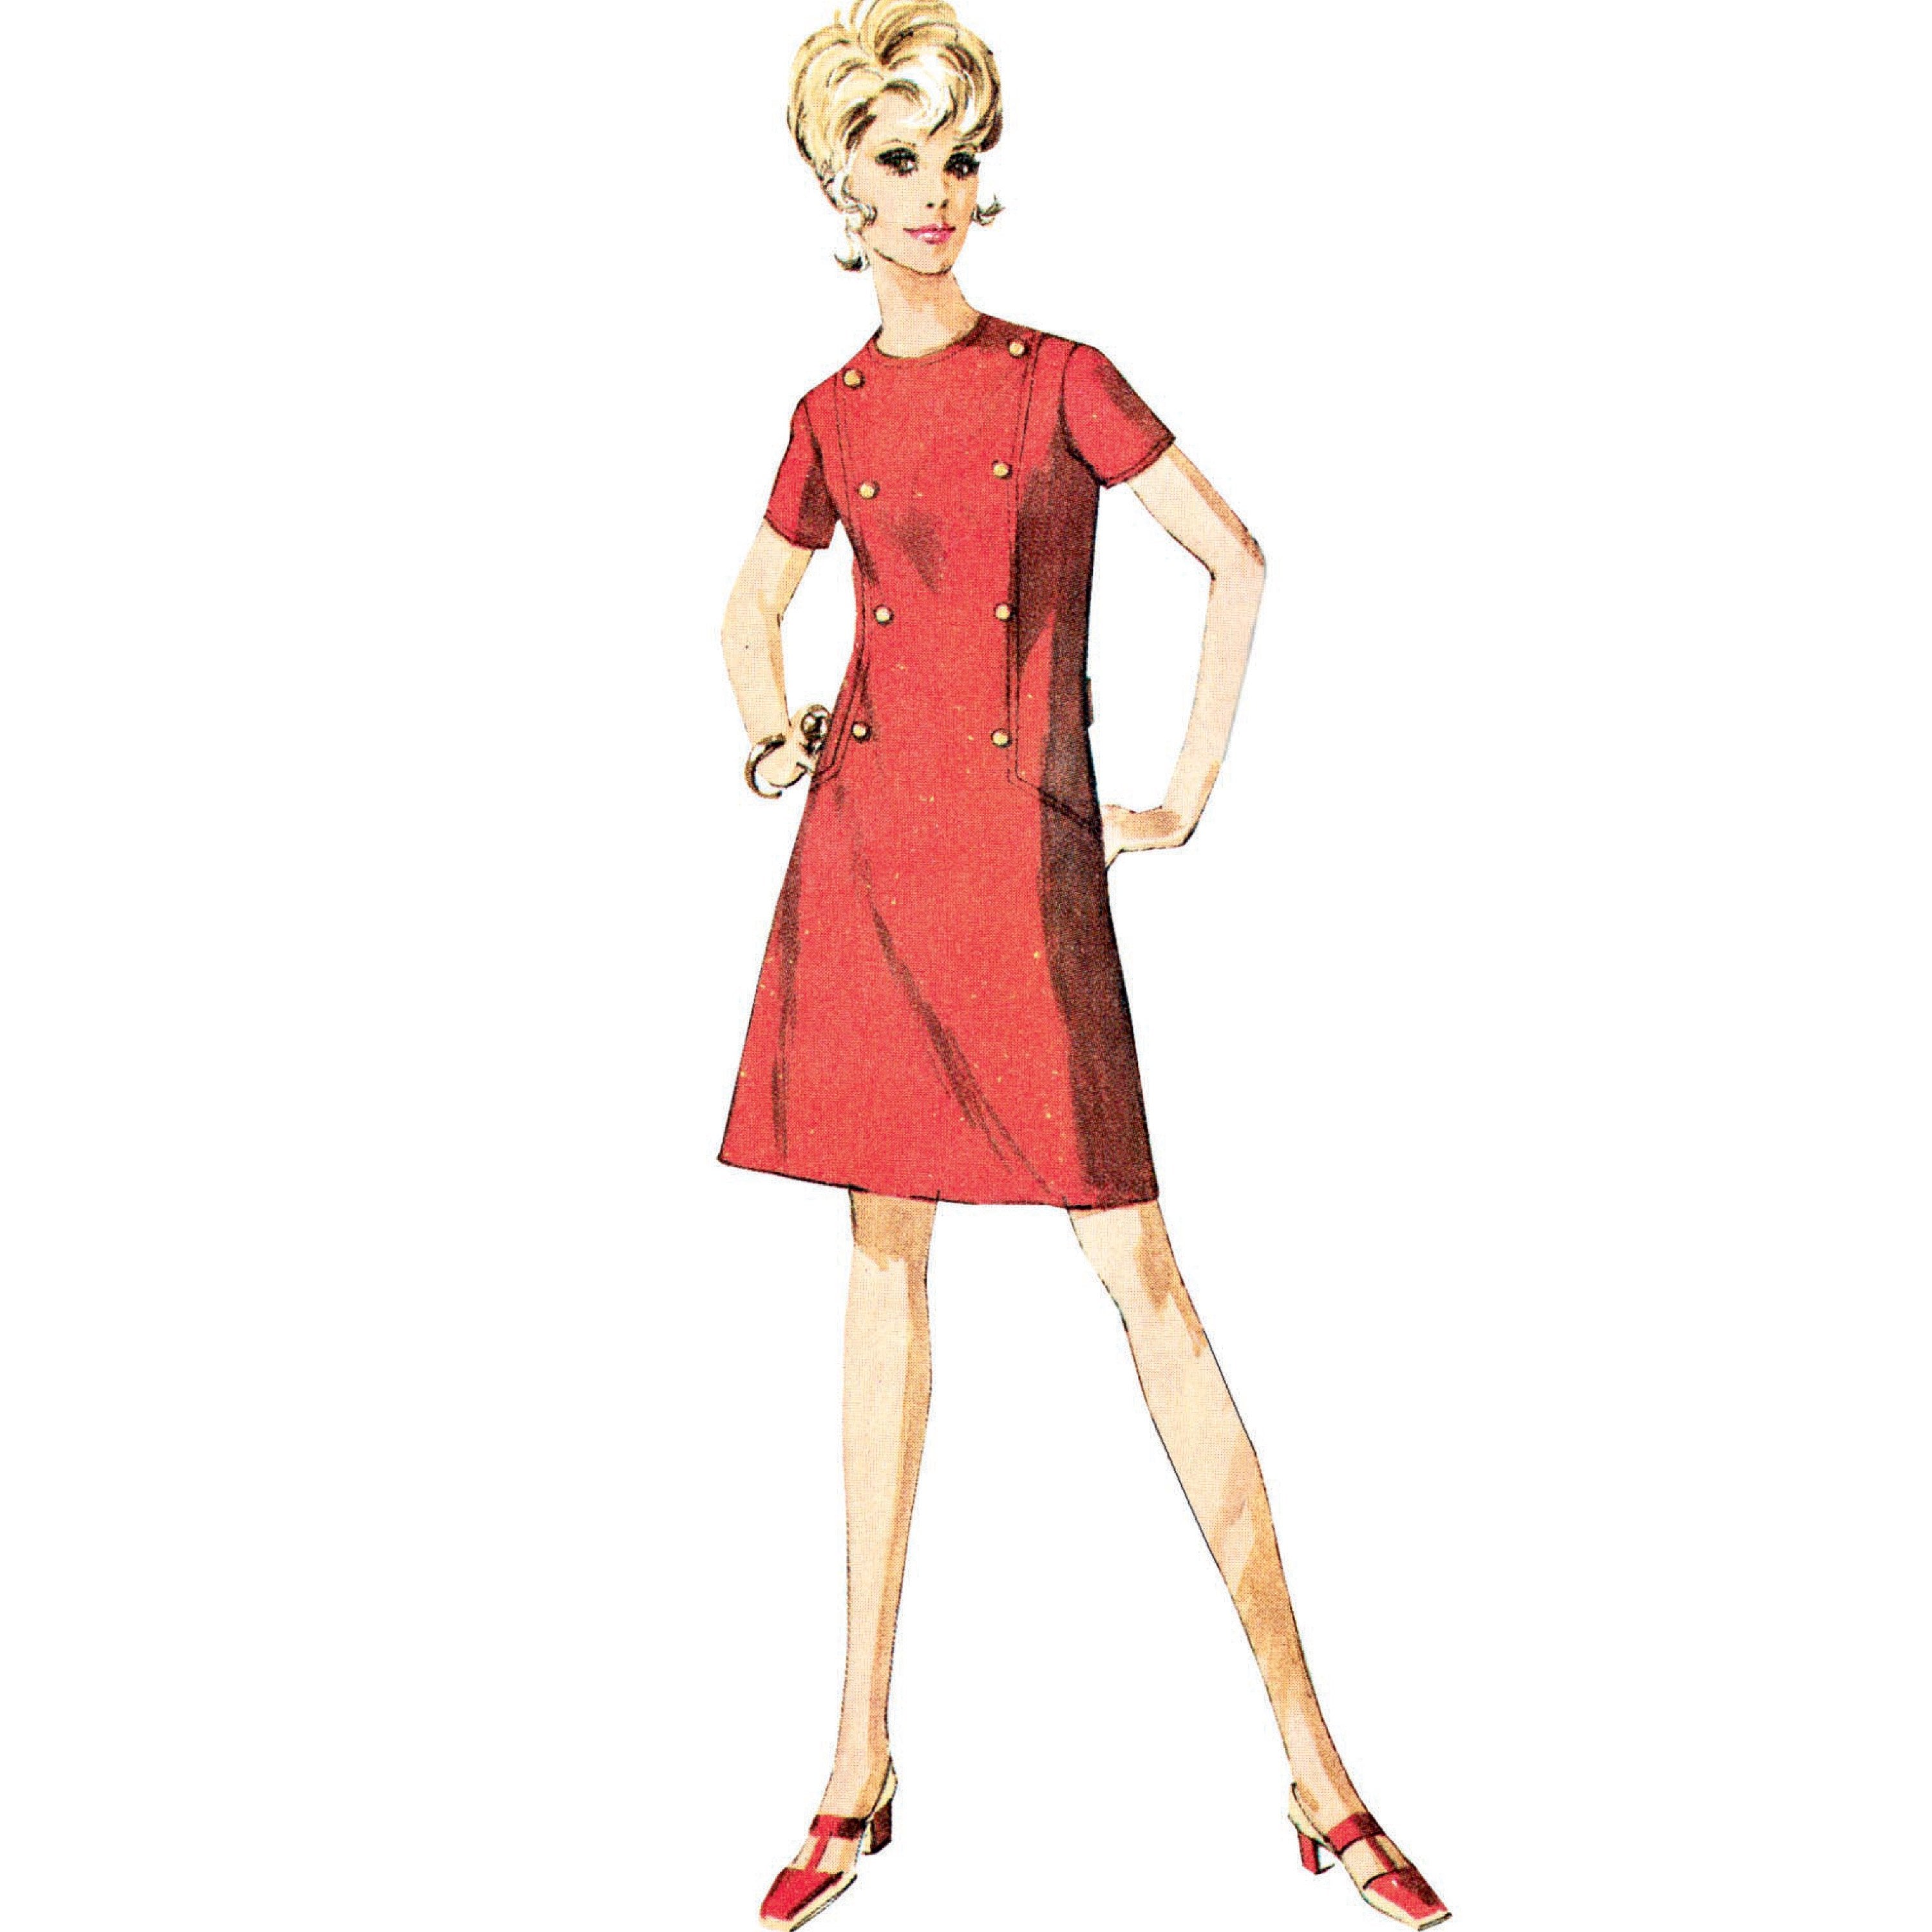 Simplicity Sewing Pattern 9371 Misses' and Women's Dress with Collar, Cuff and Sleeve Variations from Jaycotts Sewing Supplies